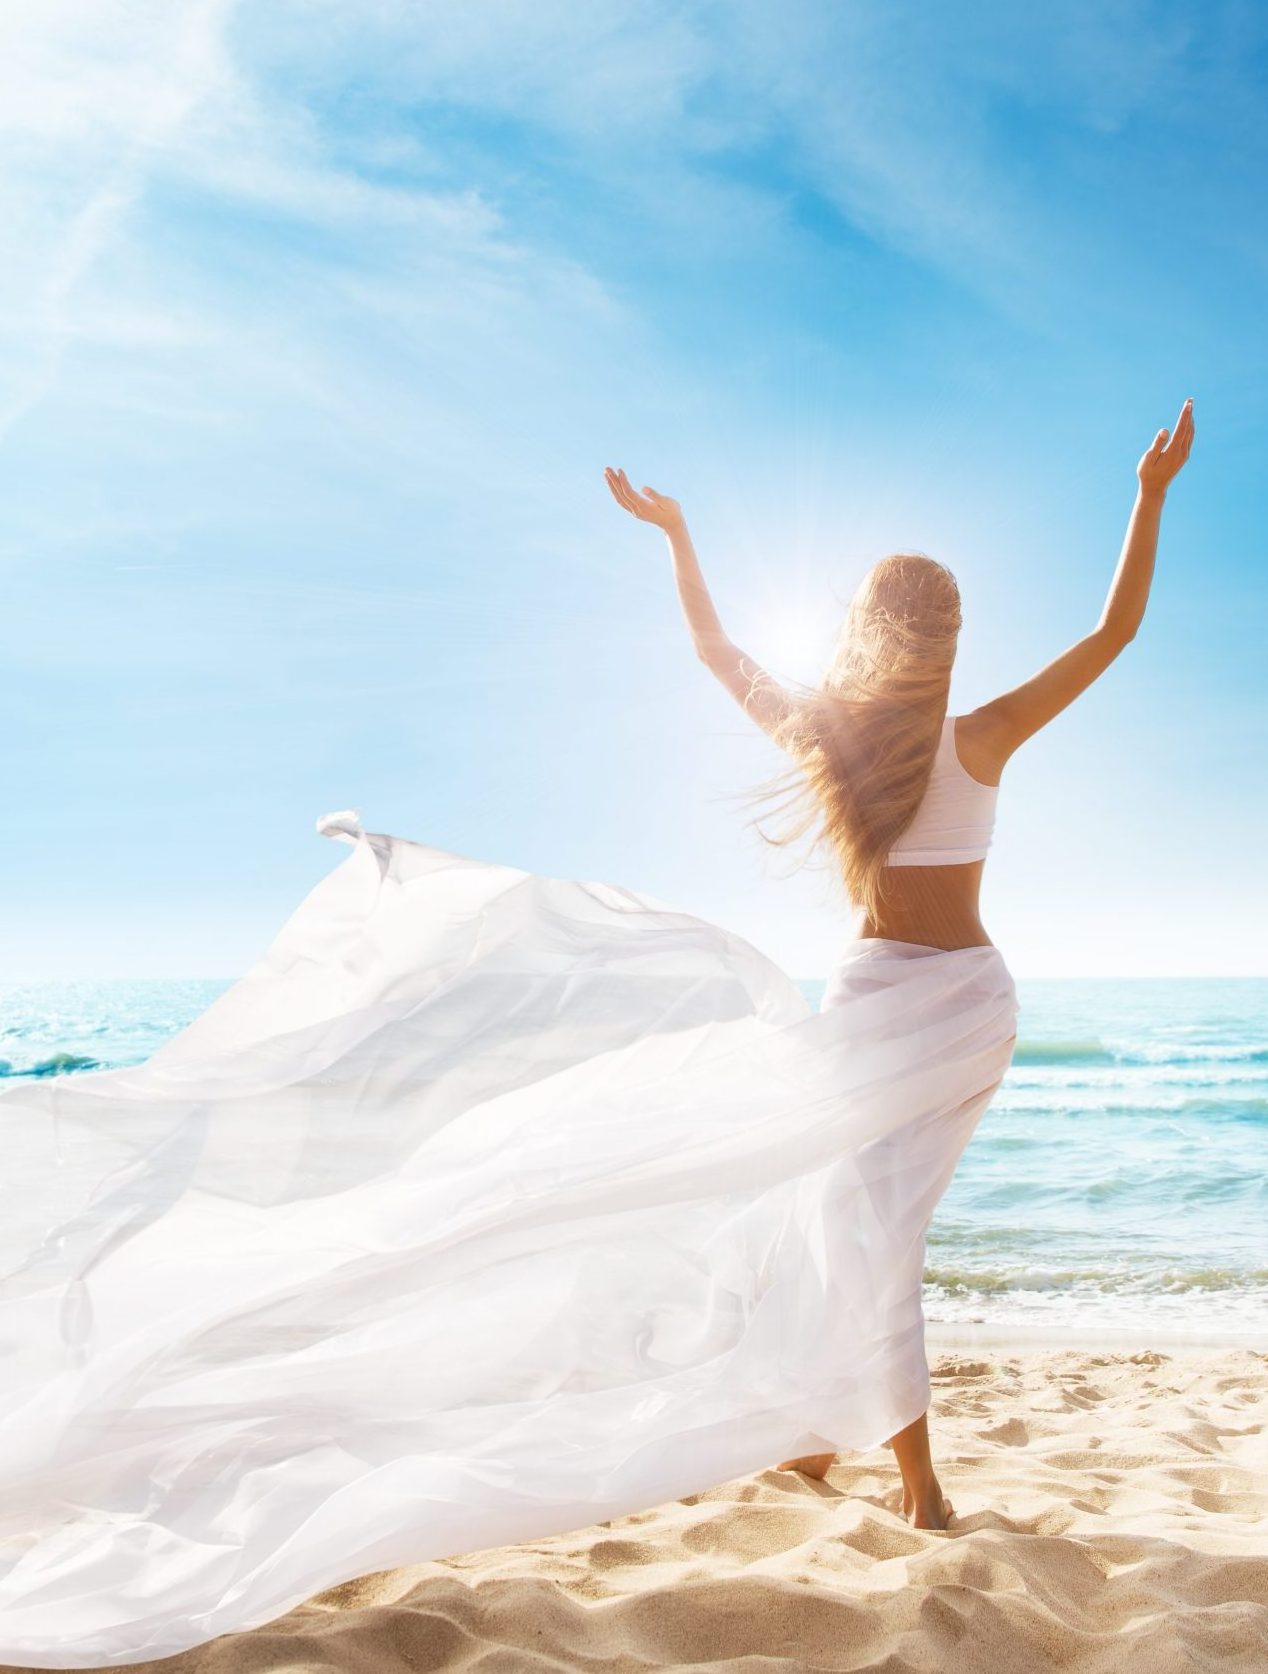 Happy Freedom Woman on Beach Enjoying Sun Arms Outstretched. Rear View of Girl Raised Hands fluttering White Dress on Wind. Summer Holiday Tropical Travel. Carefree Relax